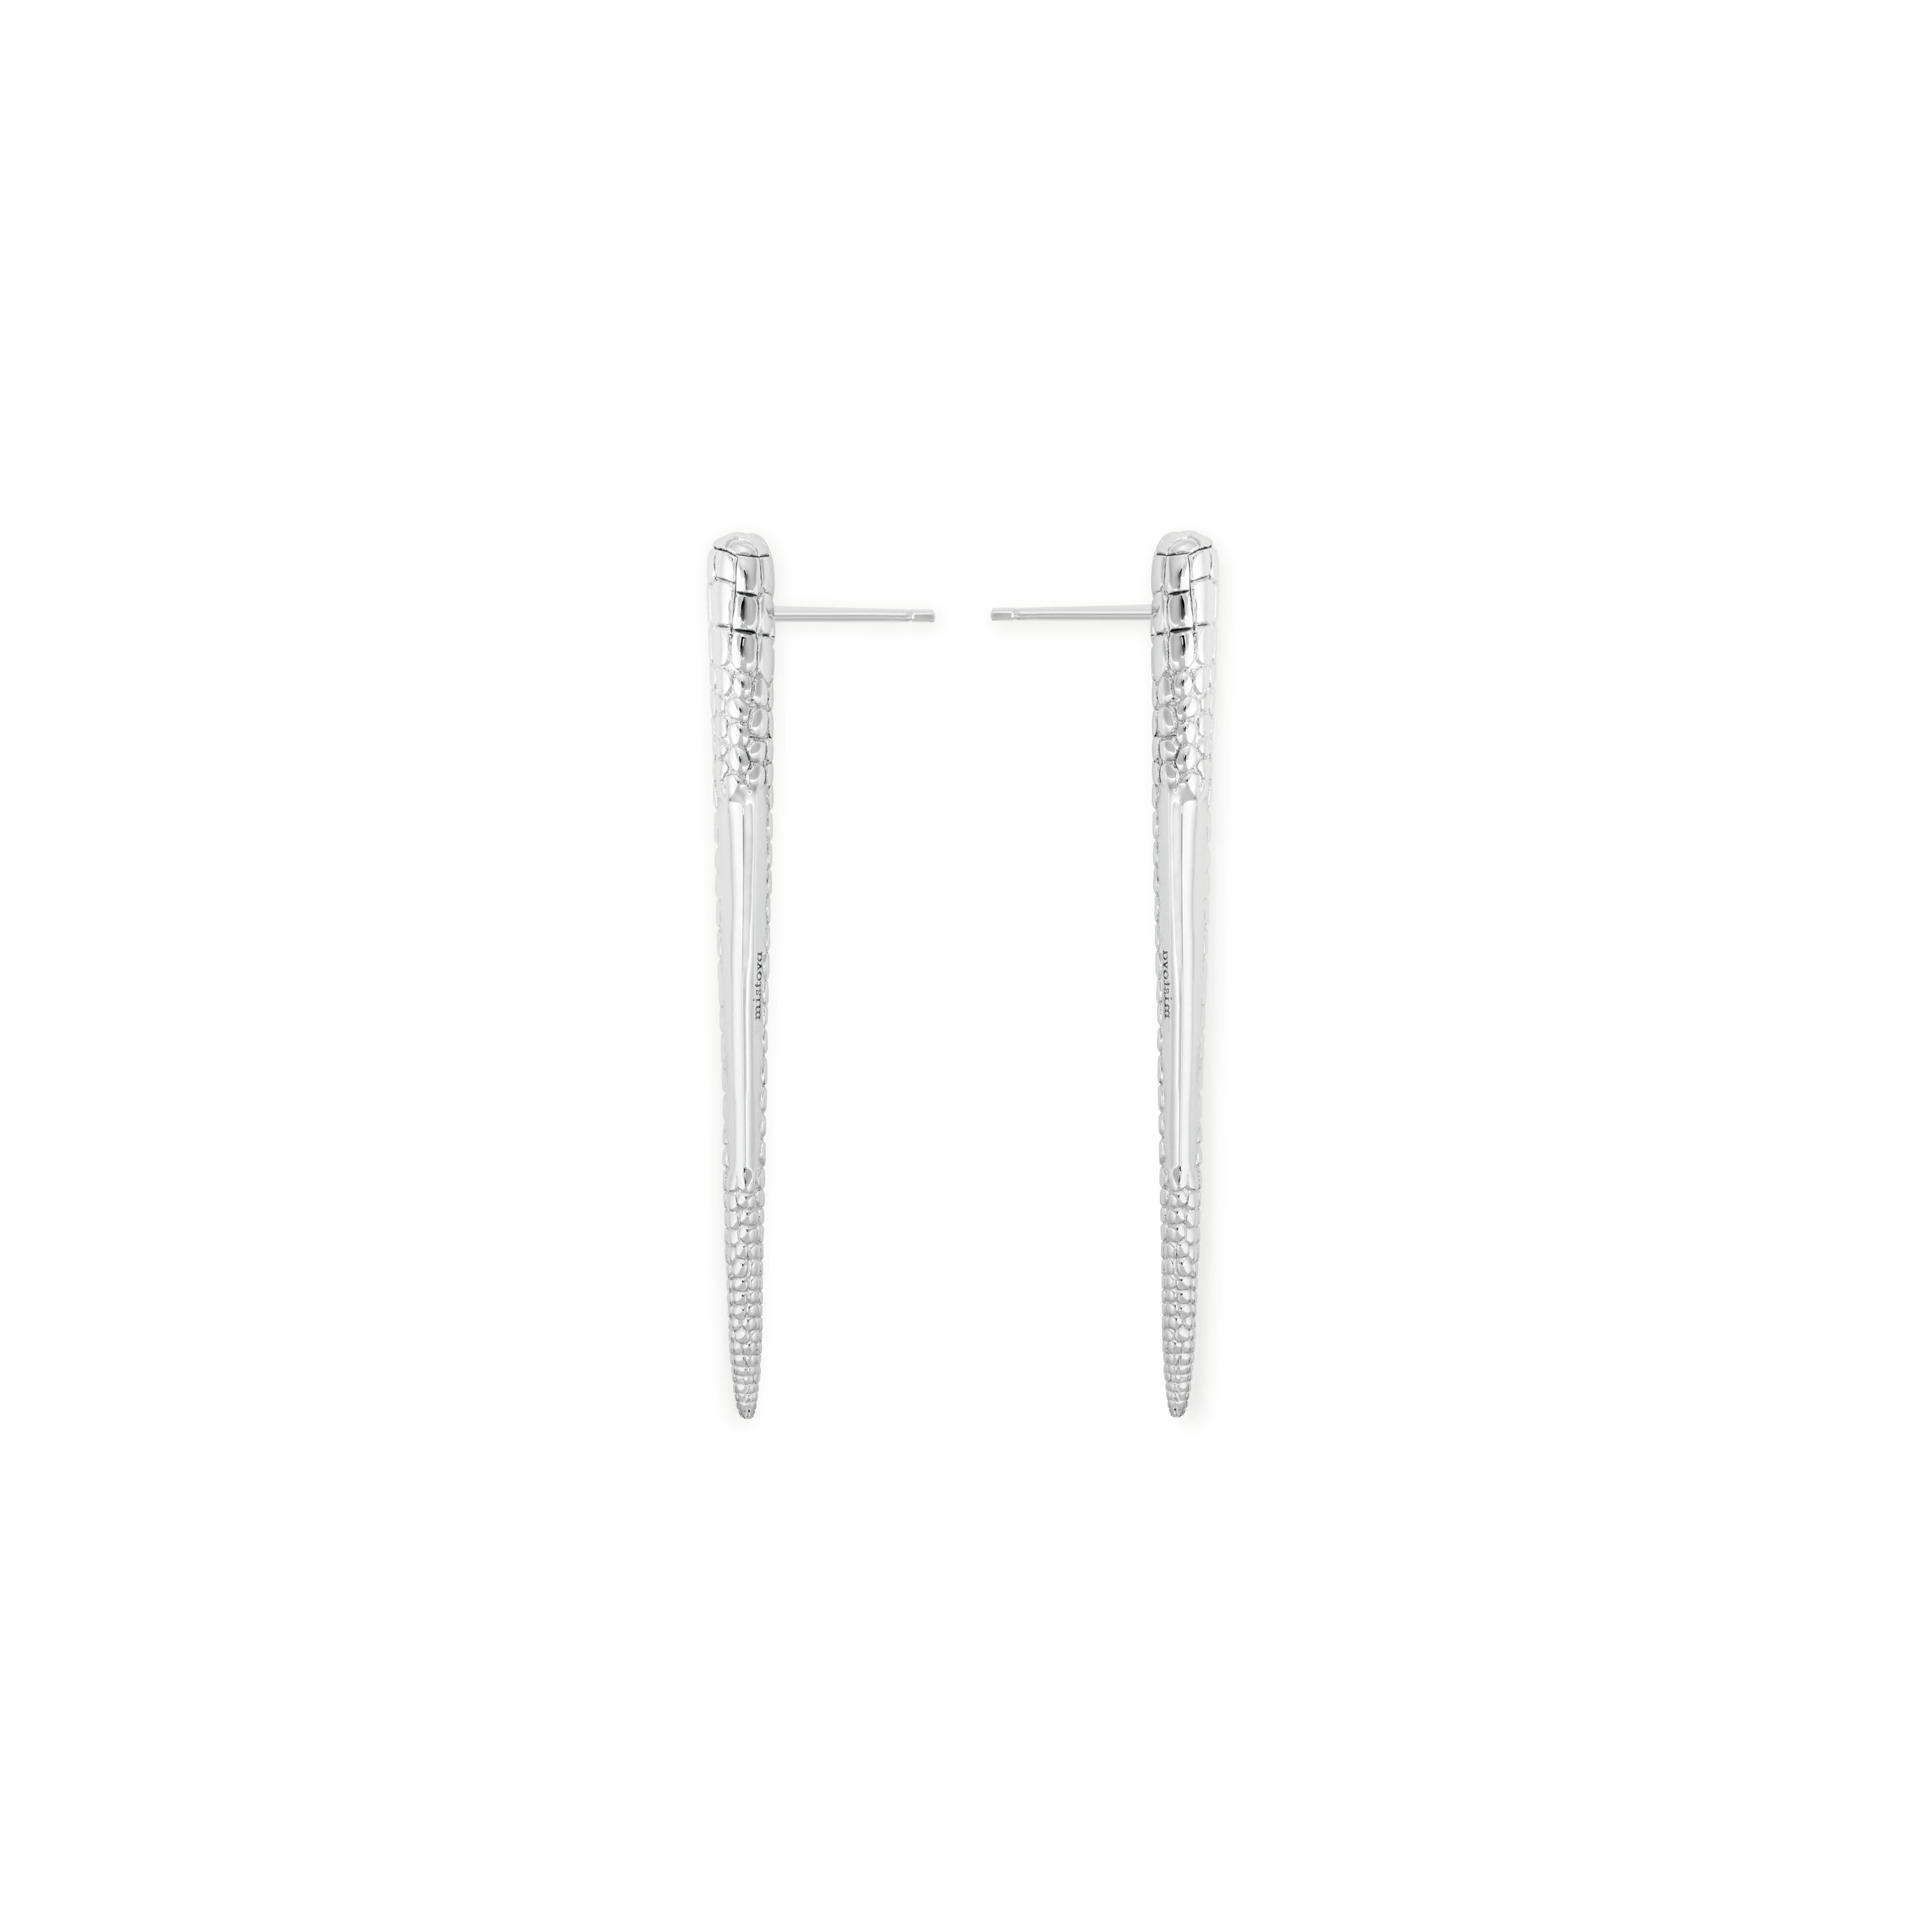 The silver Croco earrings are made from sterling silver and have a strong and fluid design. The top part has a textured surface treatment to add contrast to these earrings.  Highly polished surface for a luxury feel. 